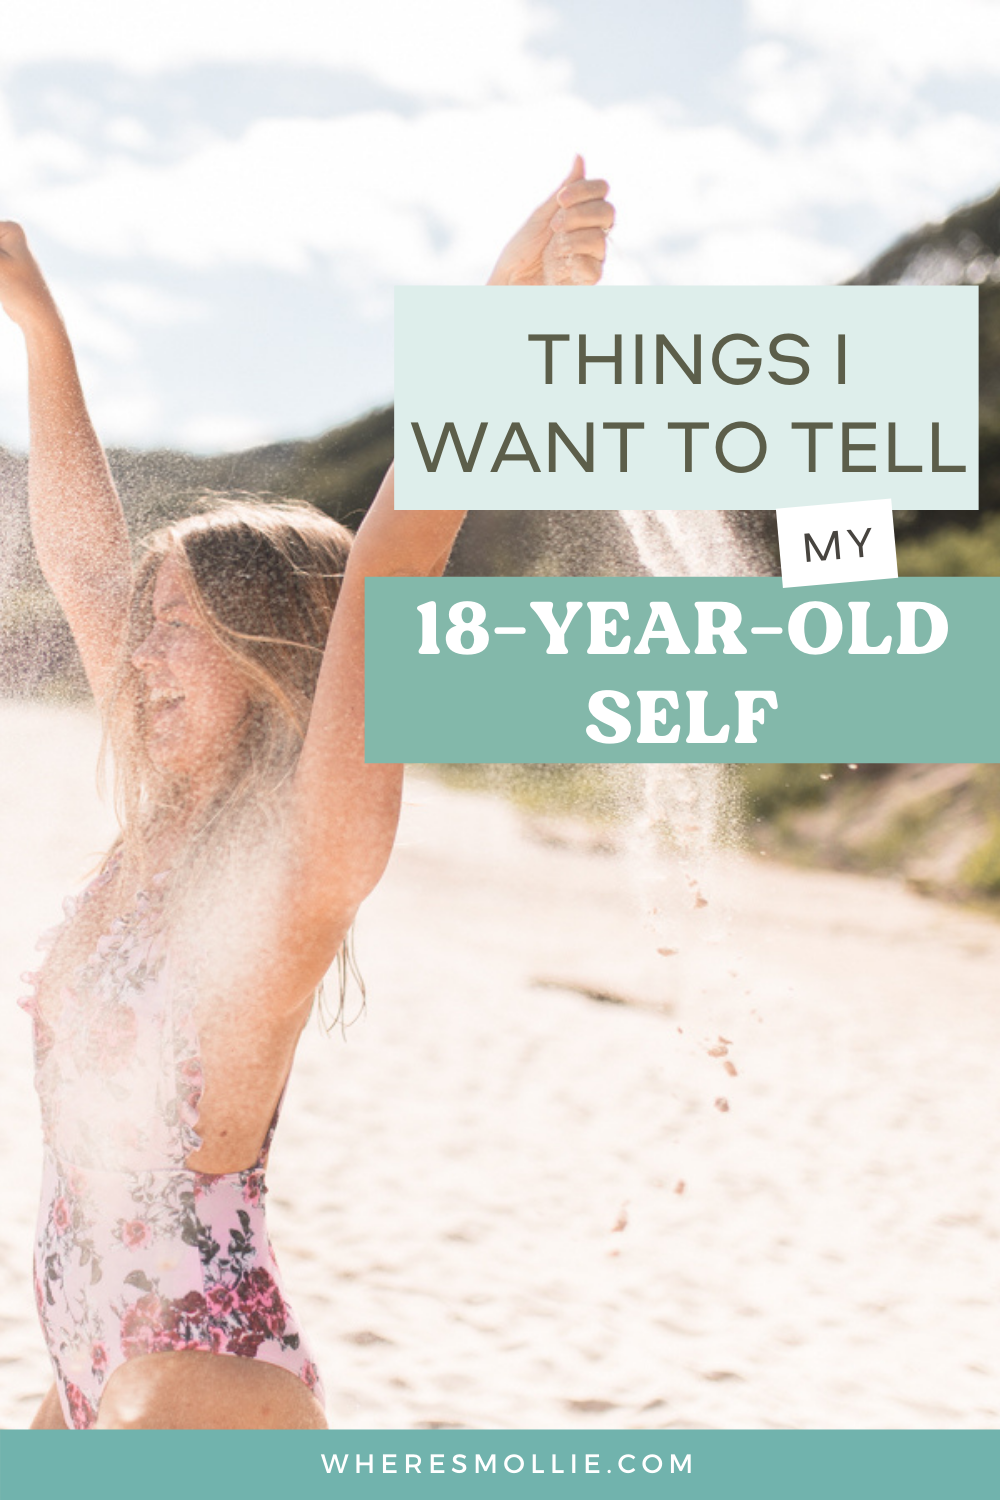 20 LIFE LESSONS that I would like to tell my 18 year old self